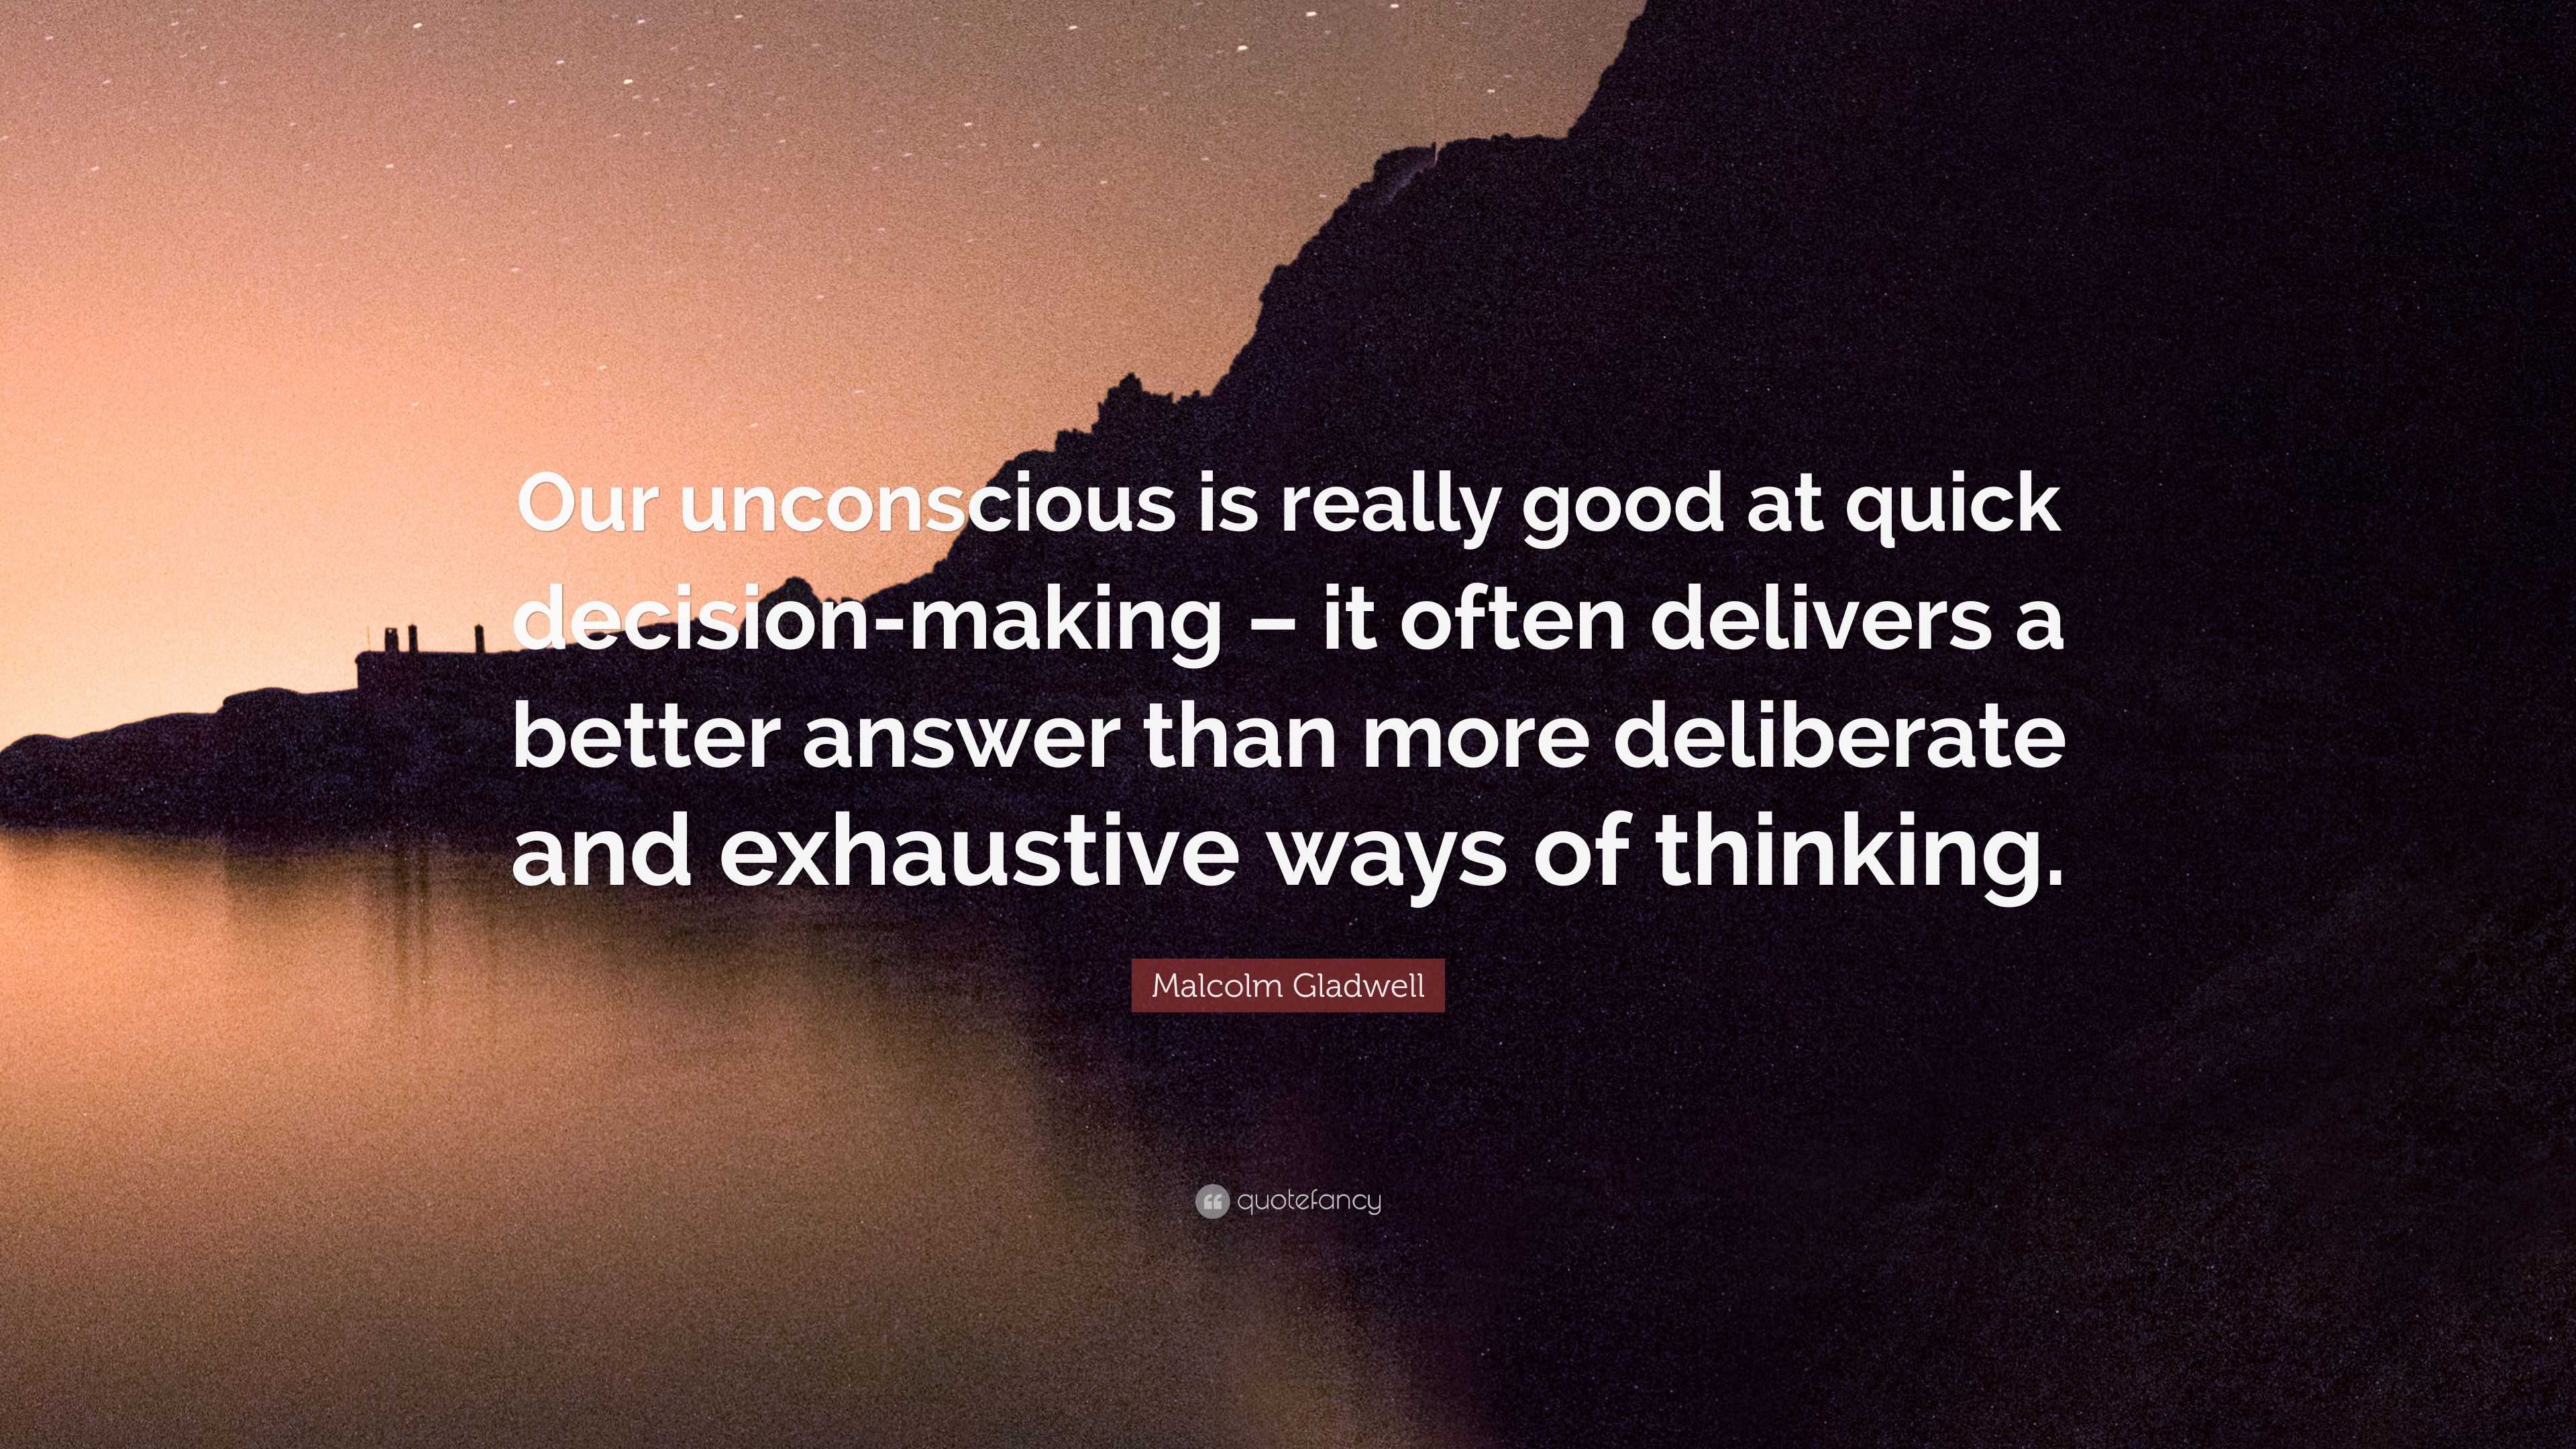 Malcolm Gladwell Quote “Our unconscious is really good at quick decision making –